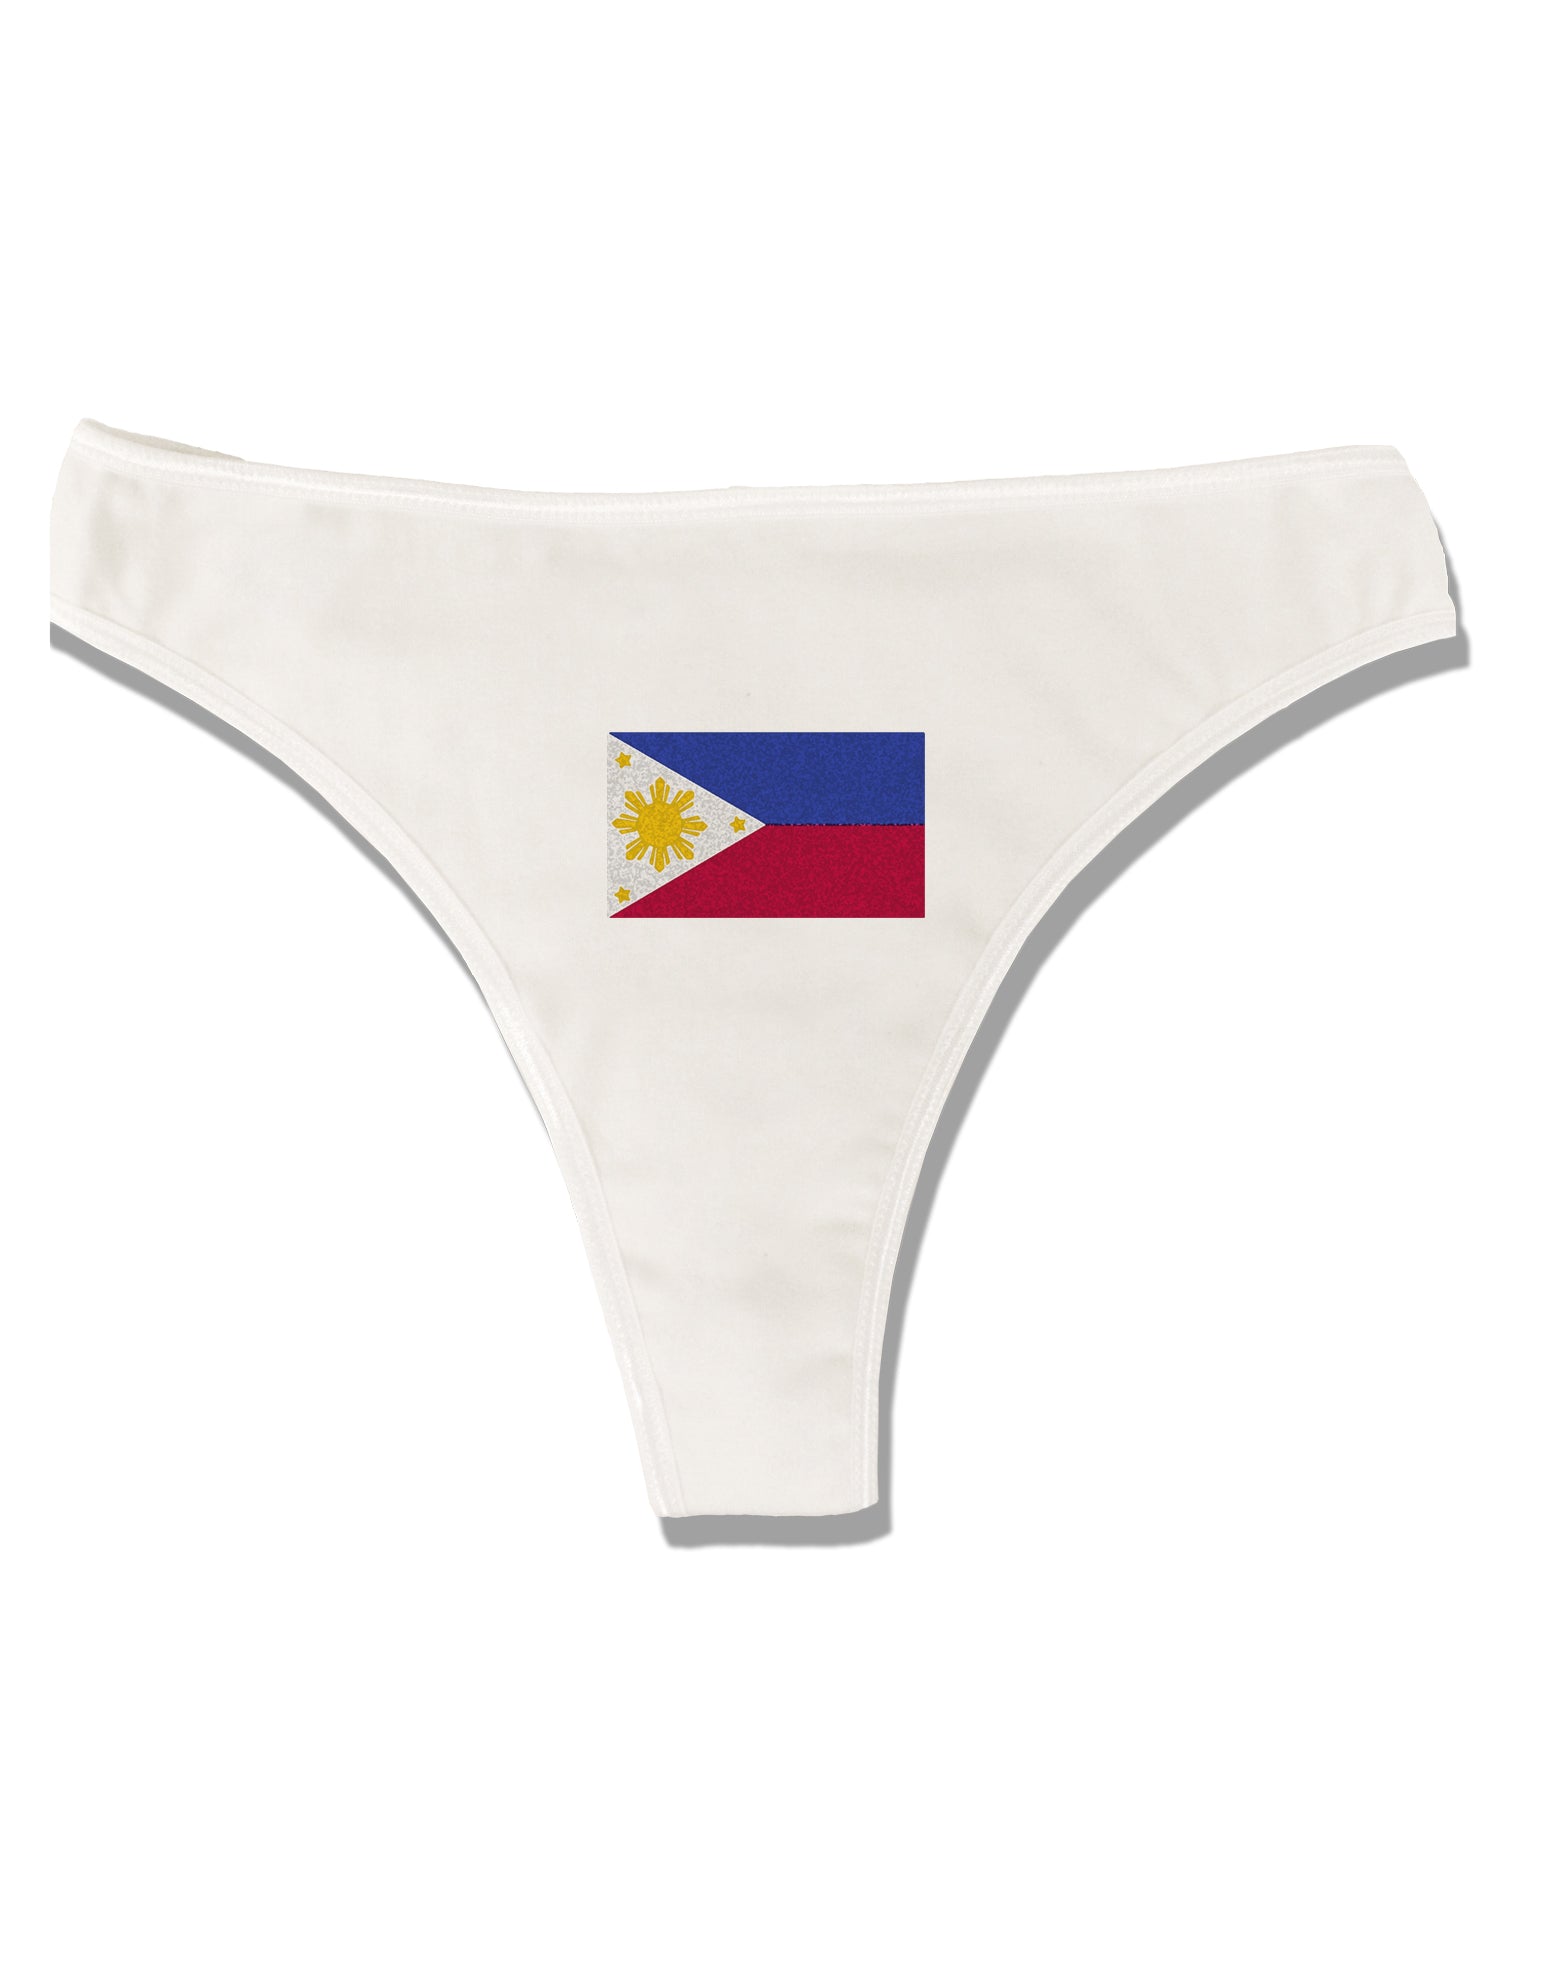 Distressed Philippines Flag Womens Thong Underwear - White - XS